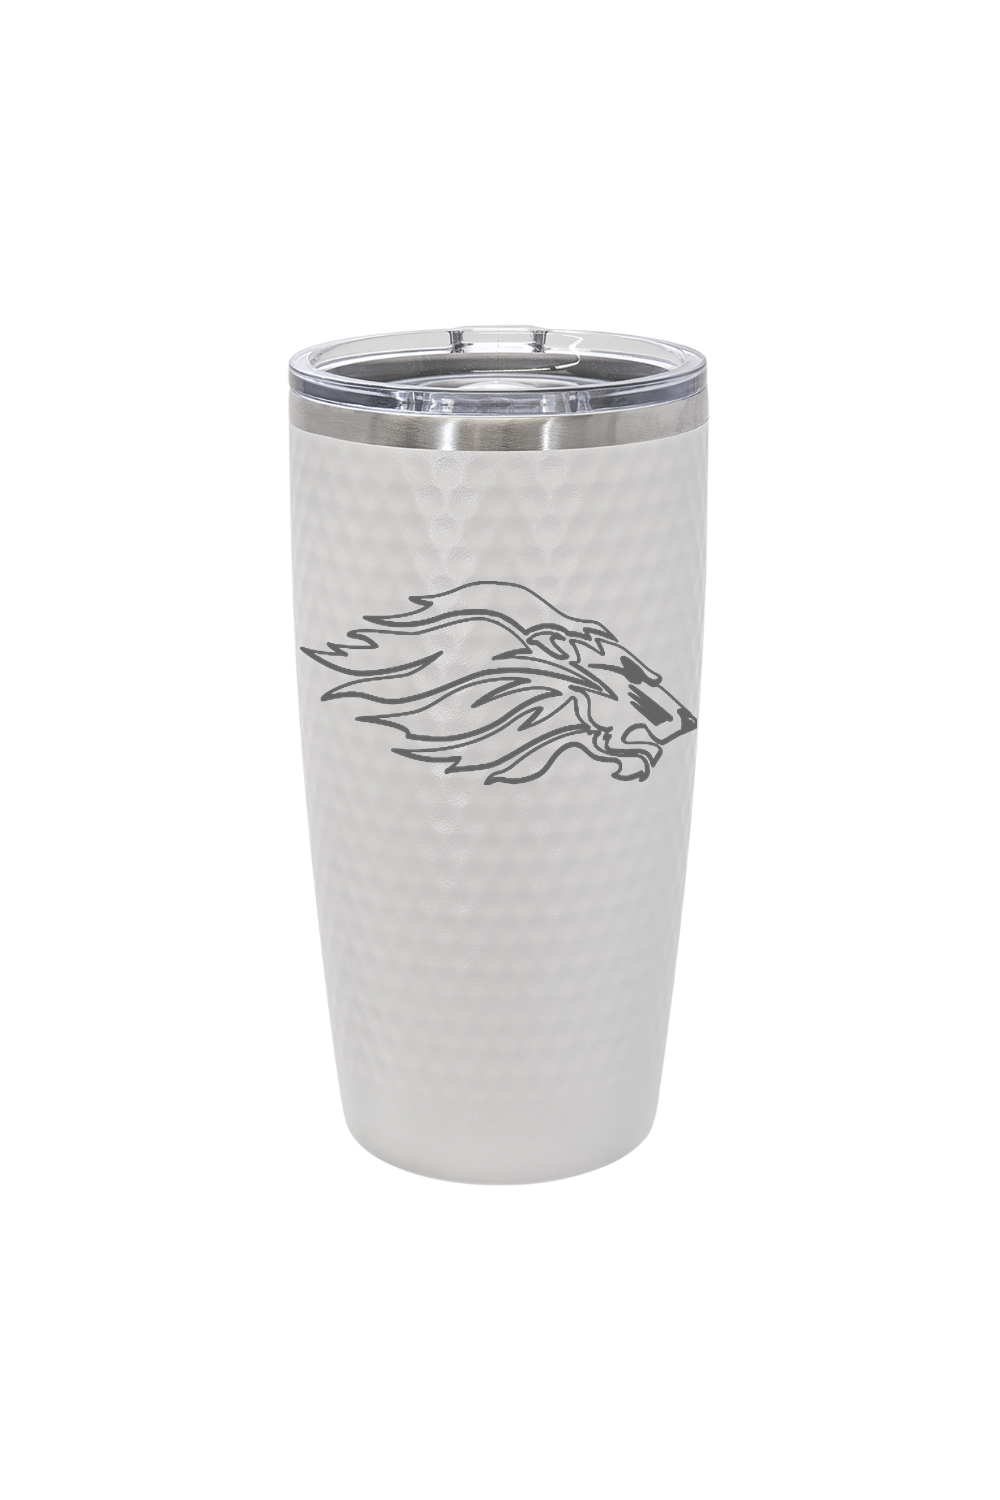 CCCS Lion 20 oz. Golf Tumbler with Dimples and Clear Slider Lid